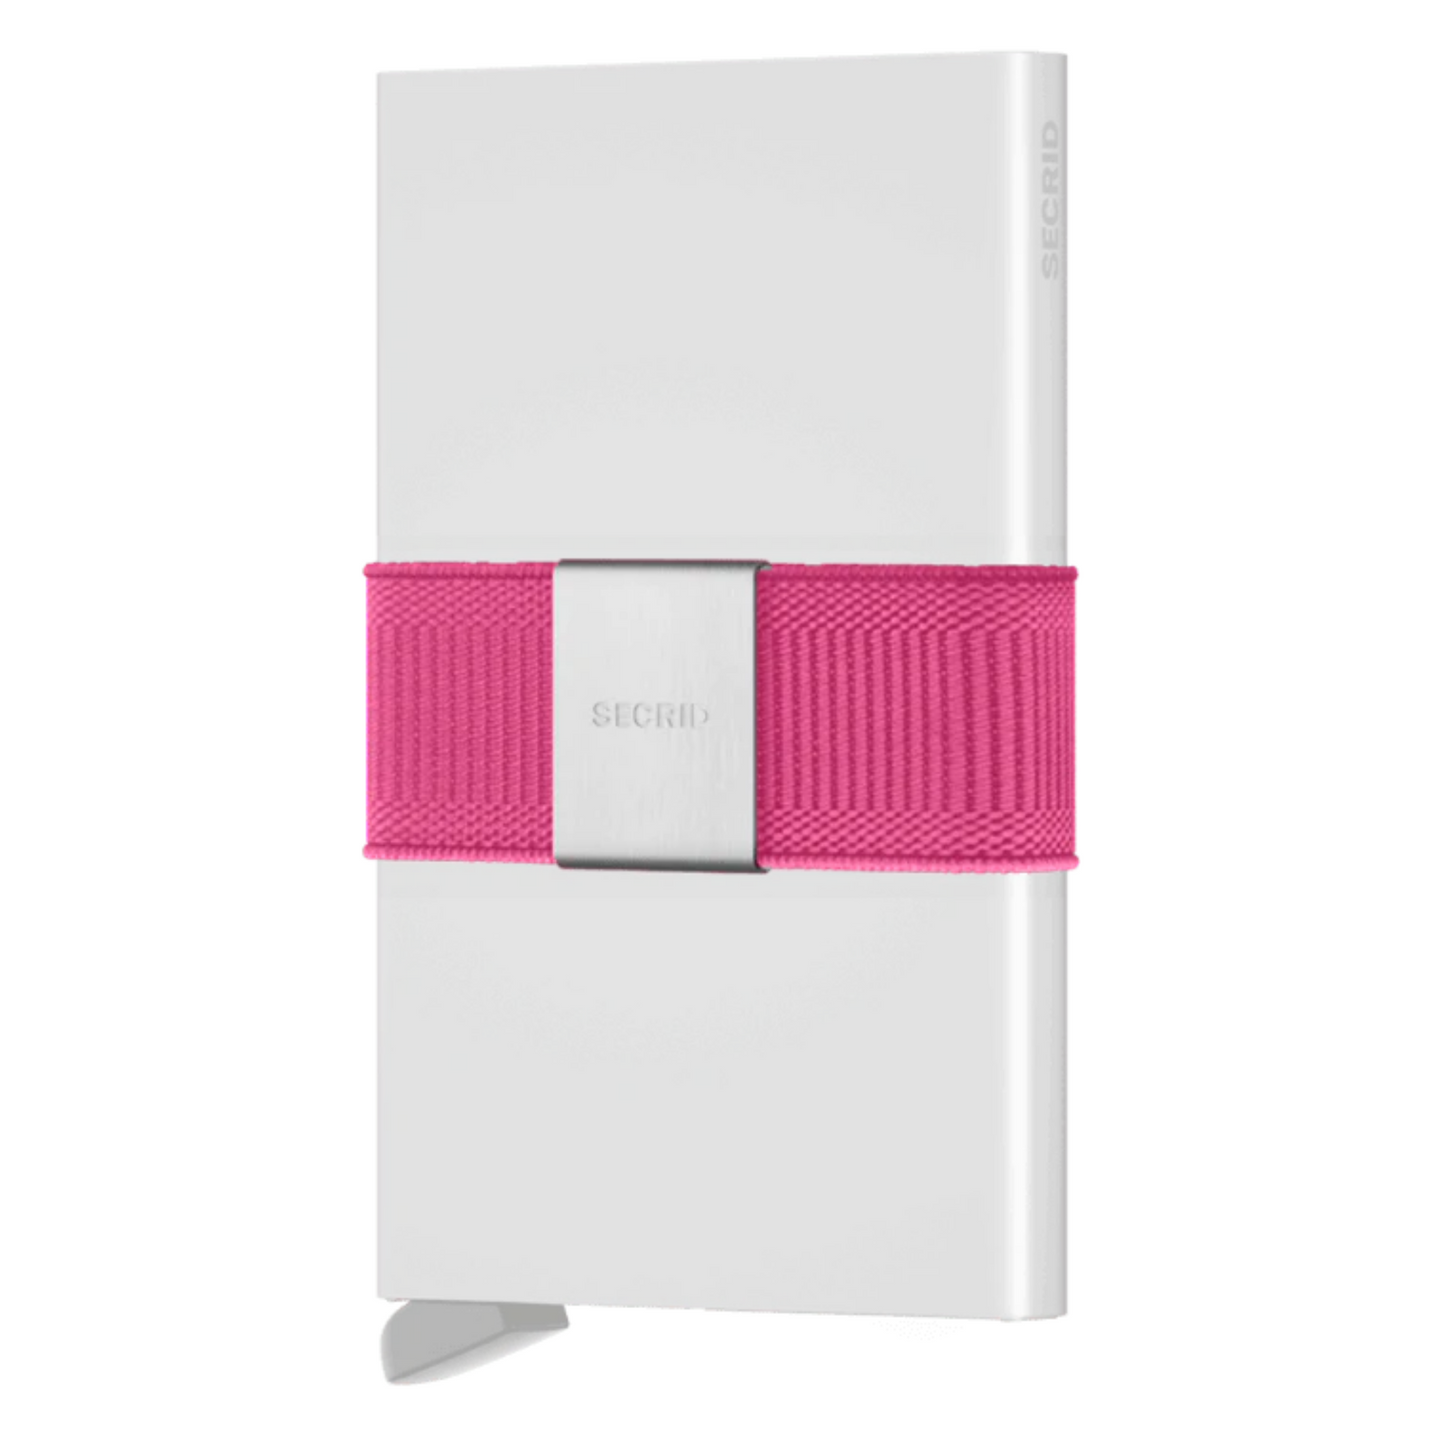 A solid pink thick elastic band has a silver metal square attached.